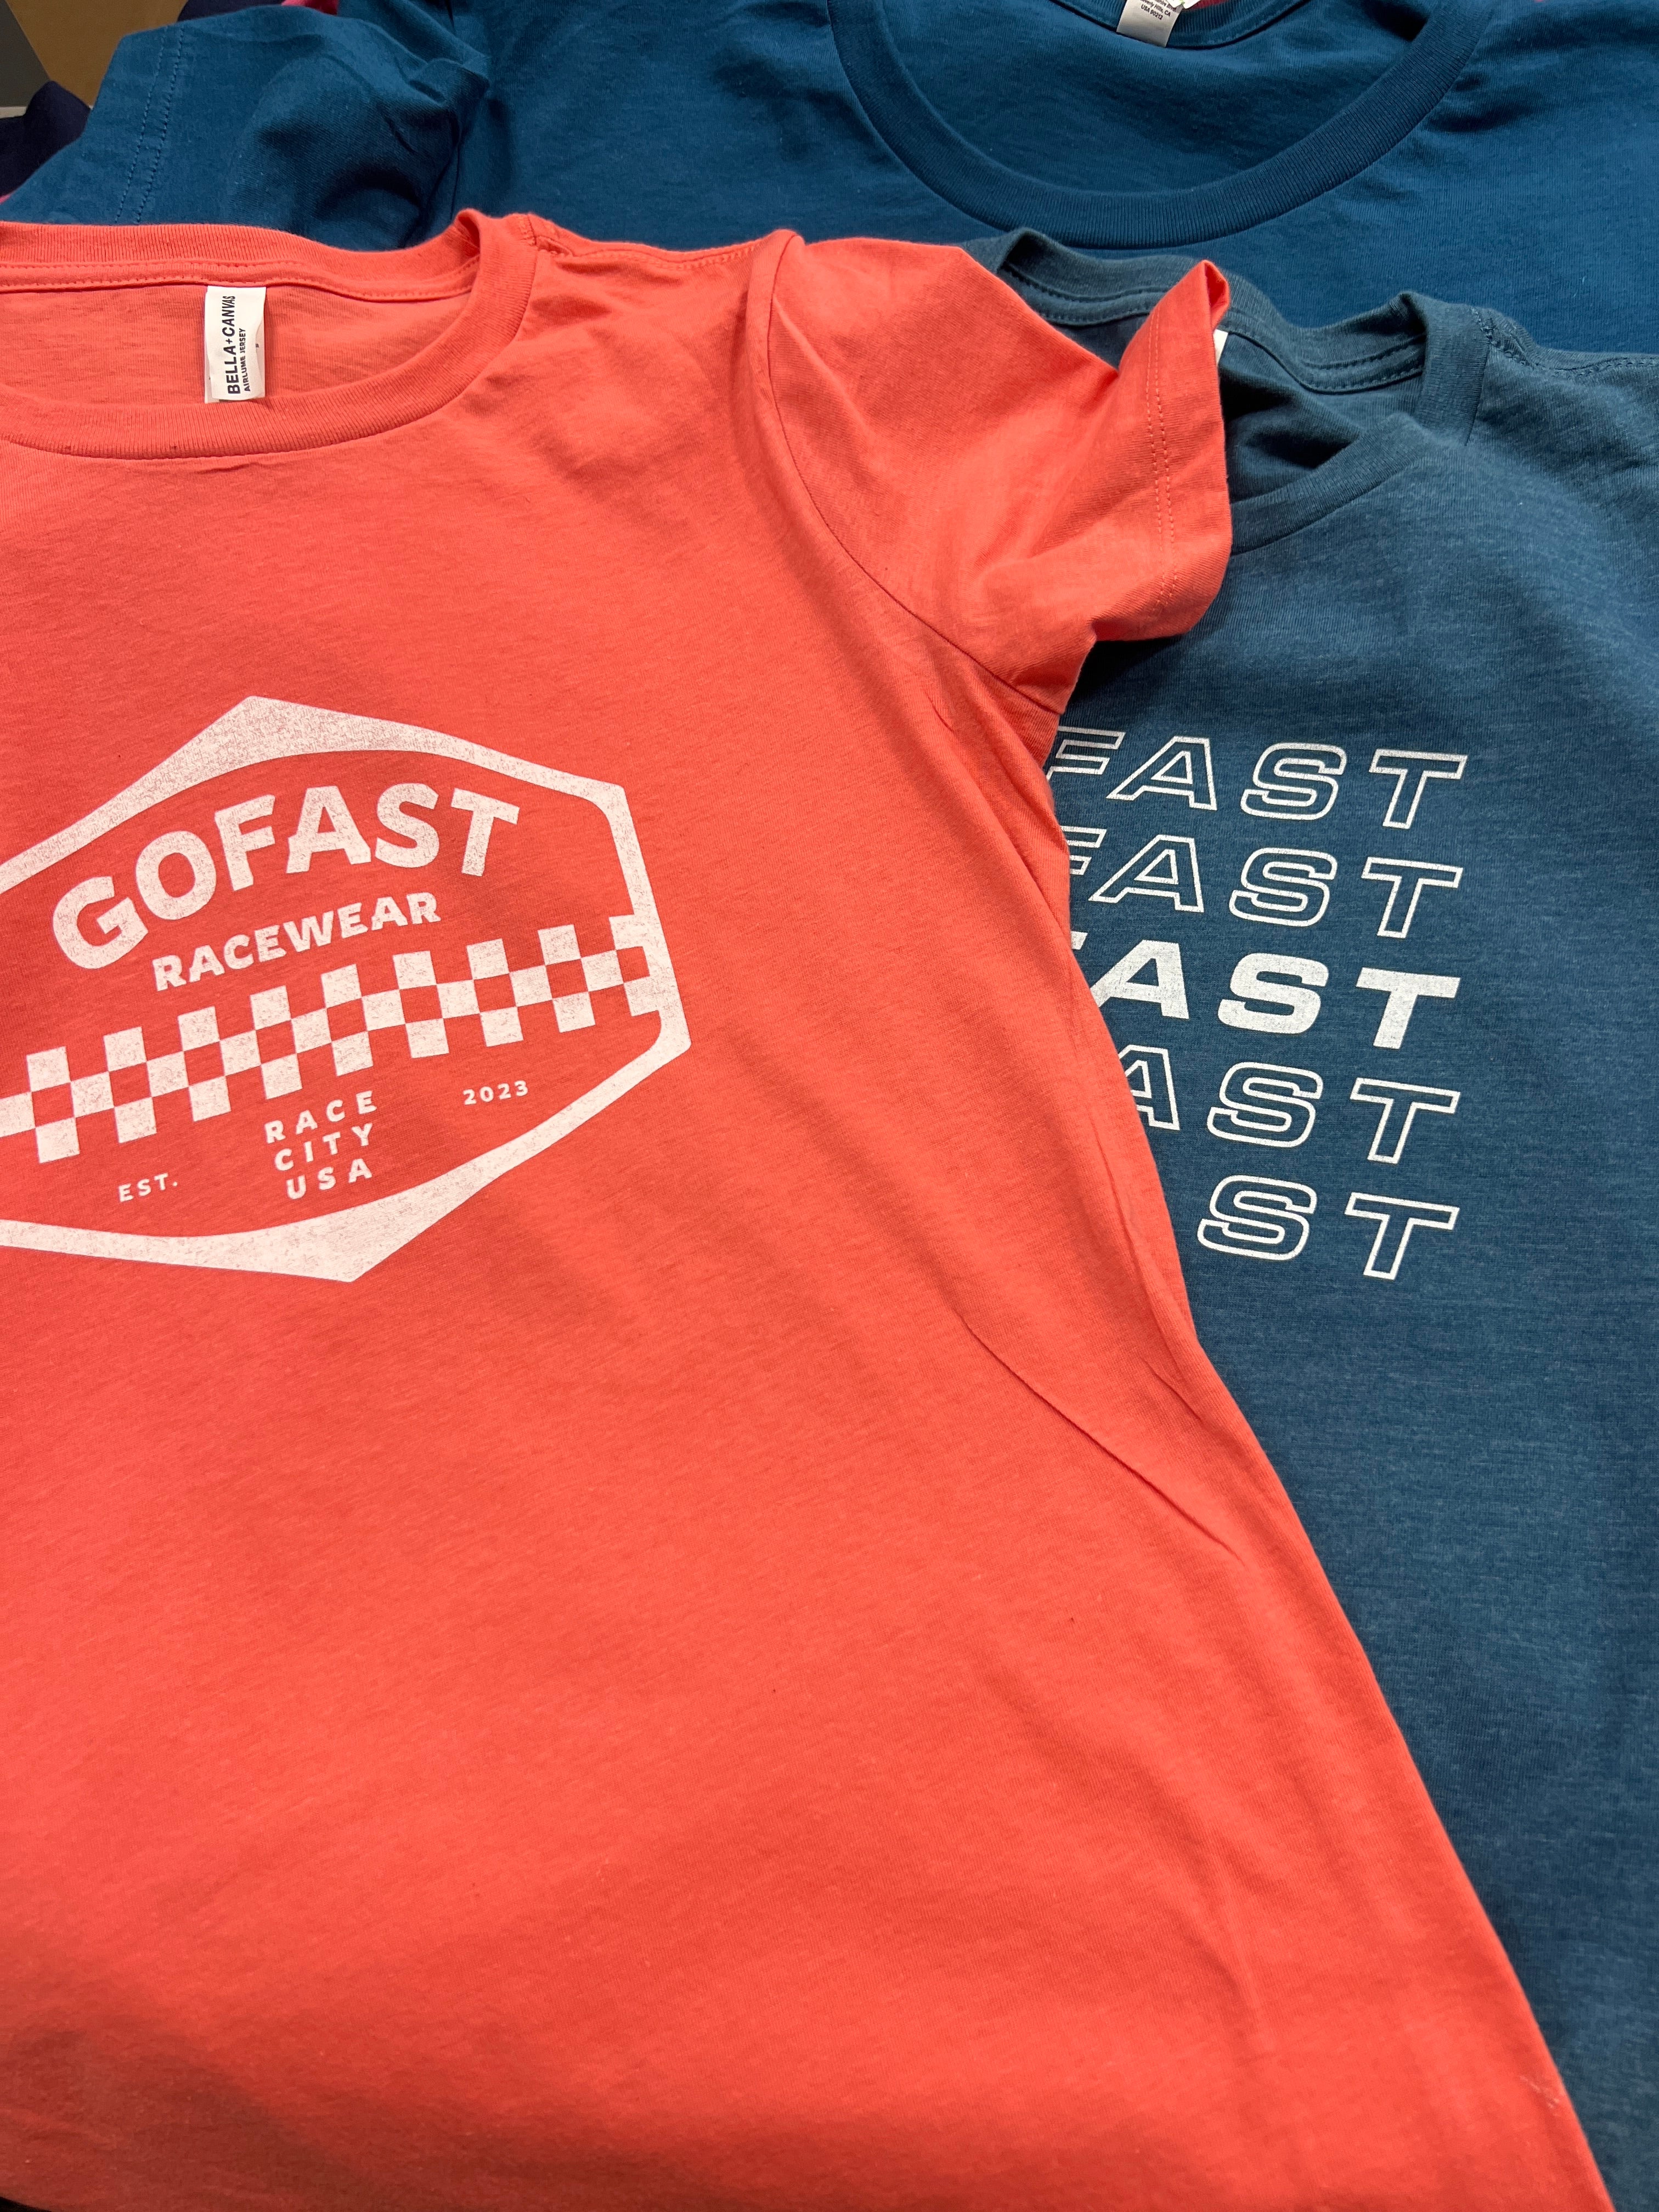 Keeping Your GoFast Racewear Fresh: Caring for Your DTG Printed Garments